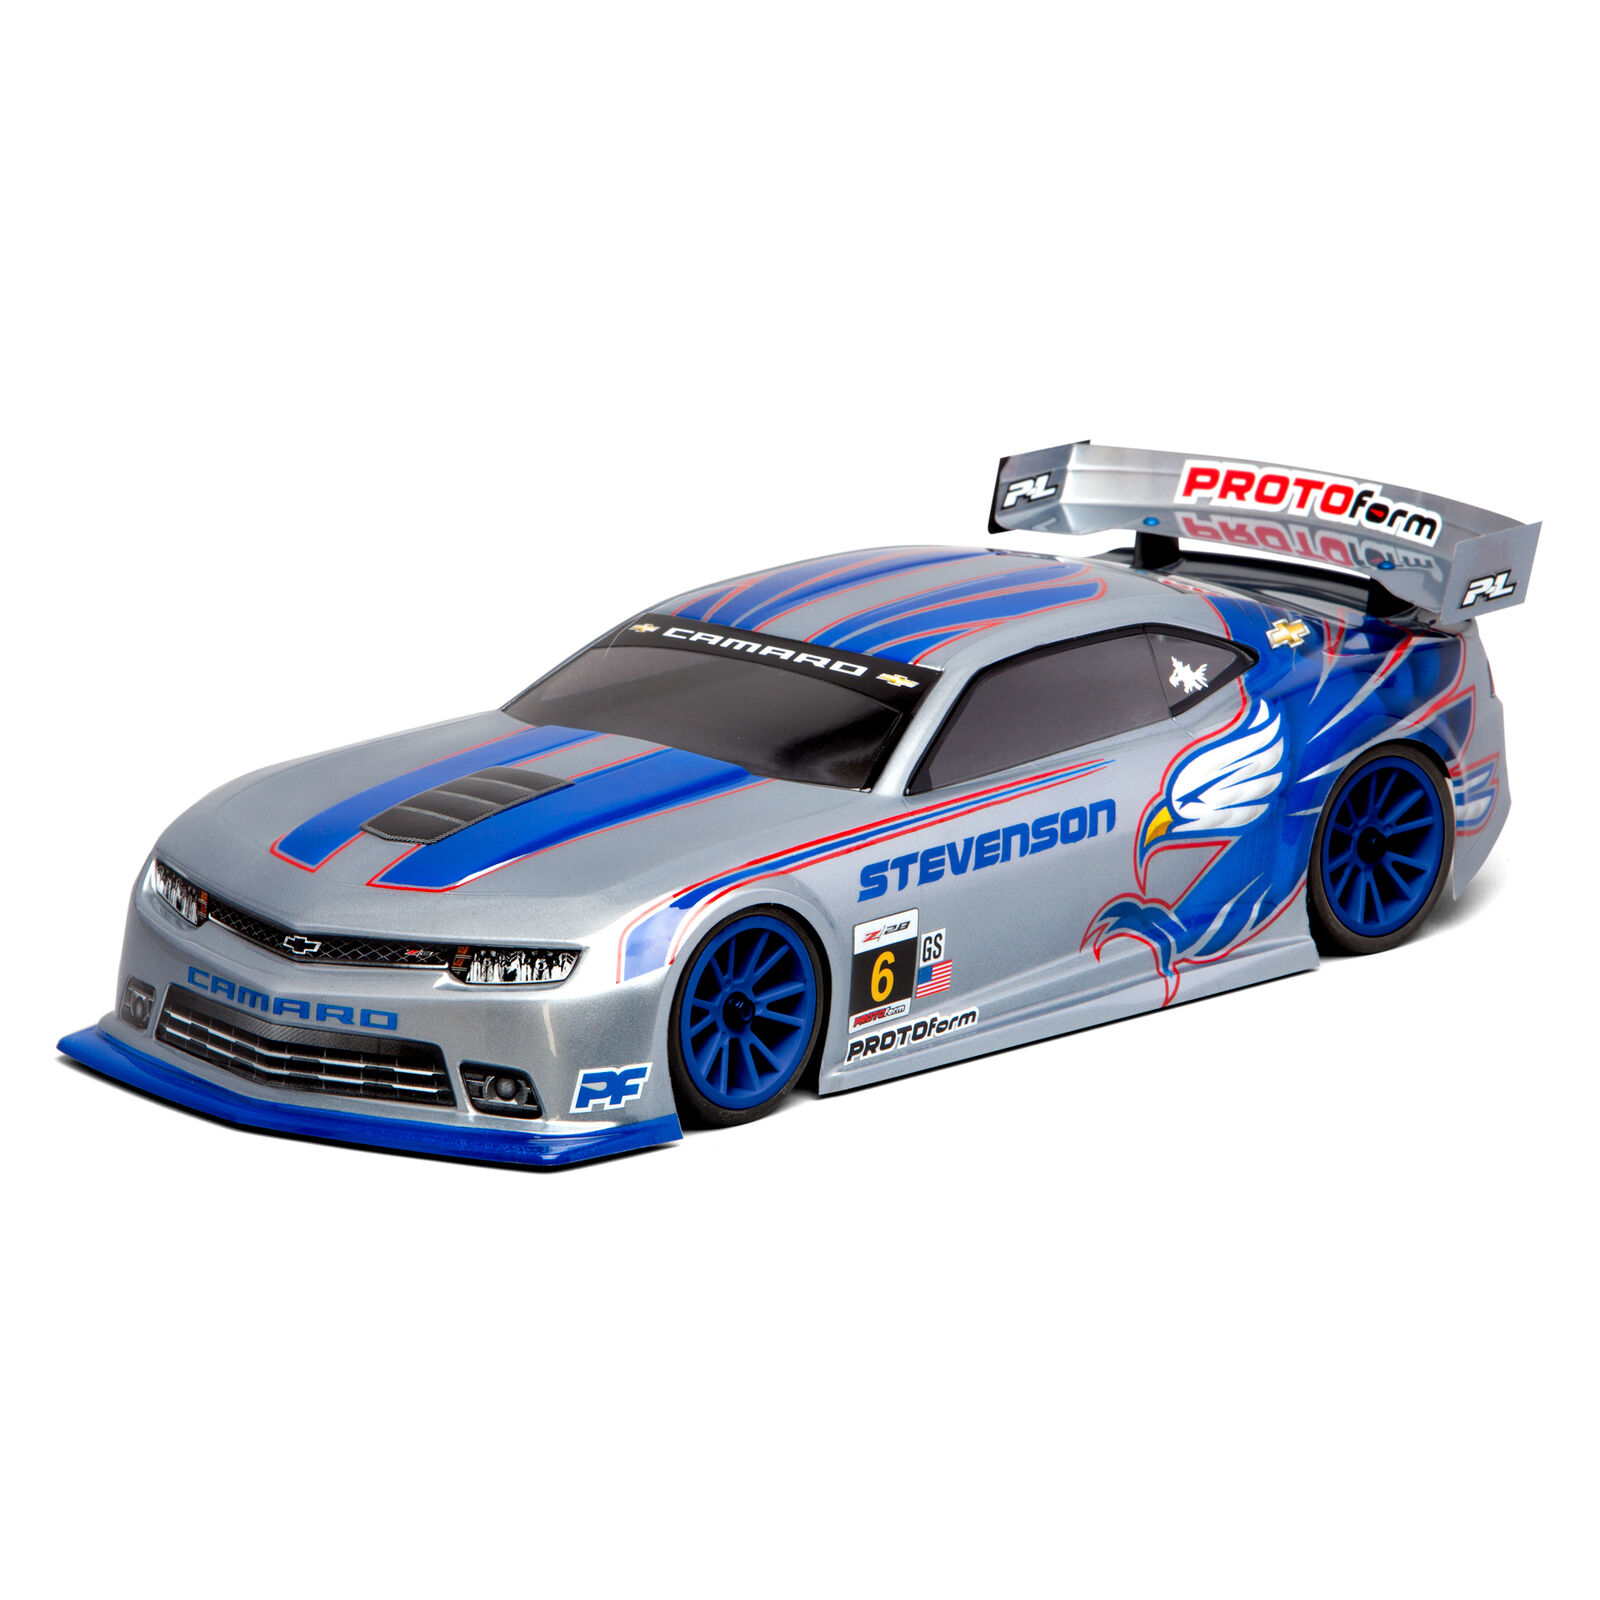 PROTOform - Pro-line Racing 1/10 Chevy Camaro Z/28 Clear Body: 190mm  Touring Car